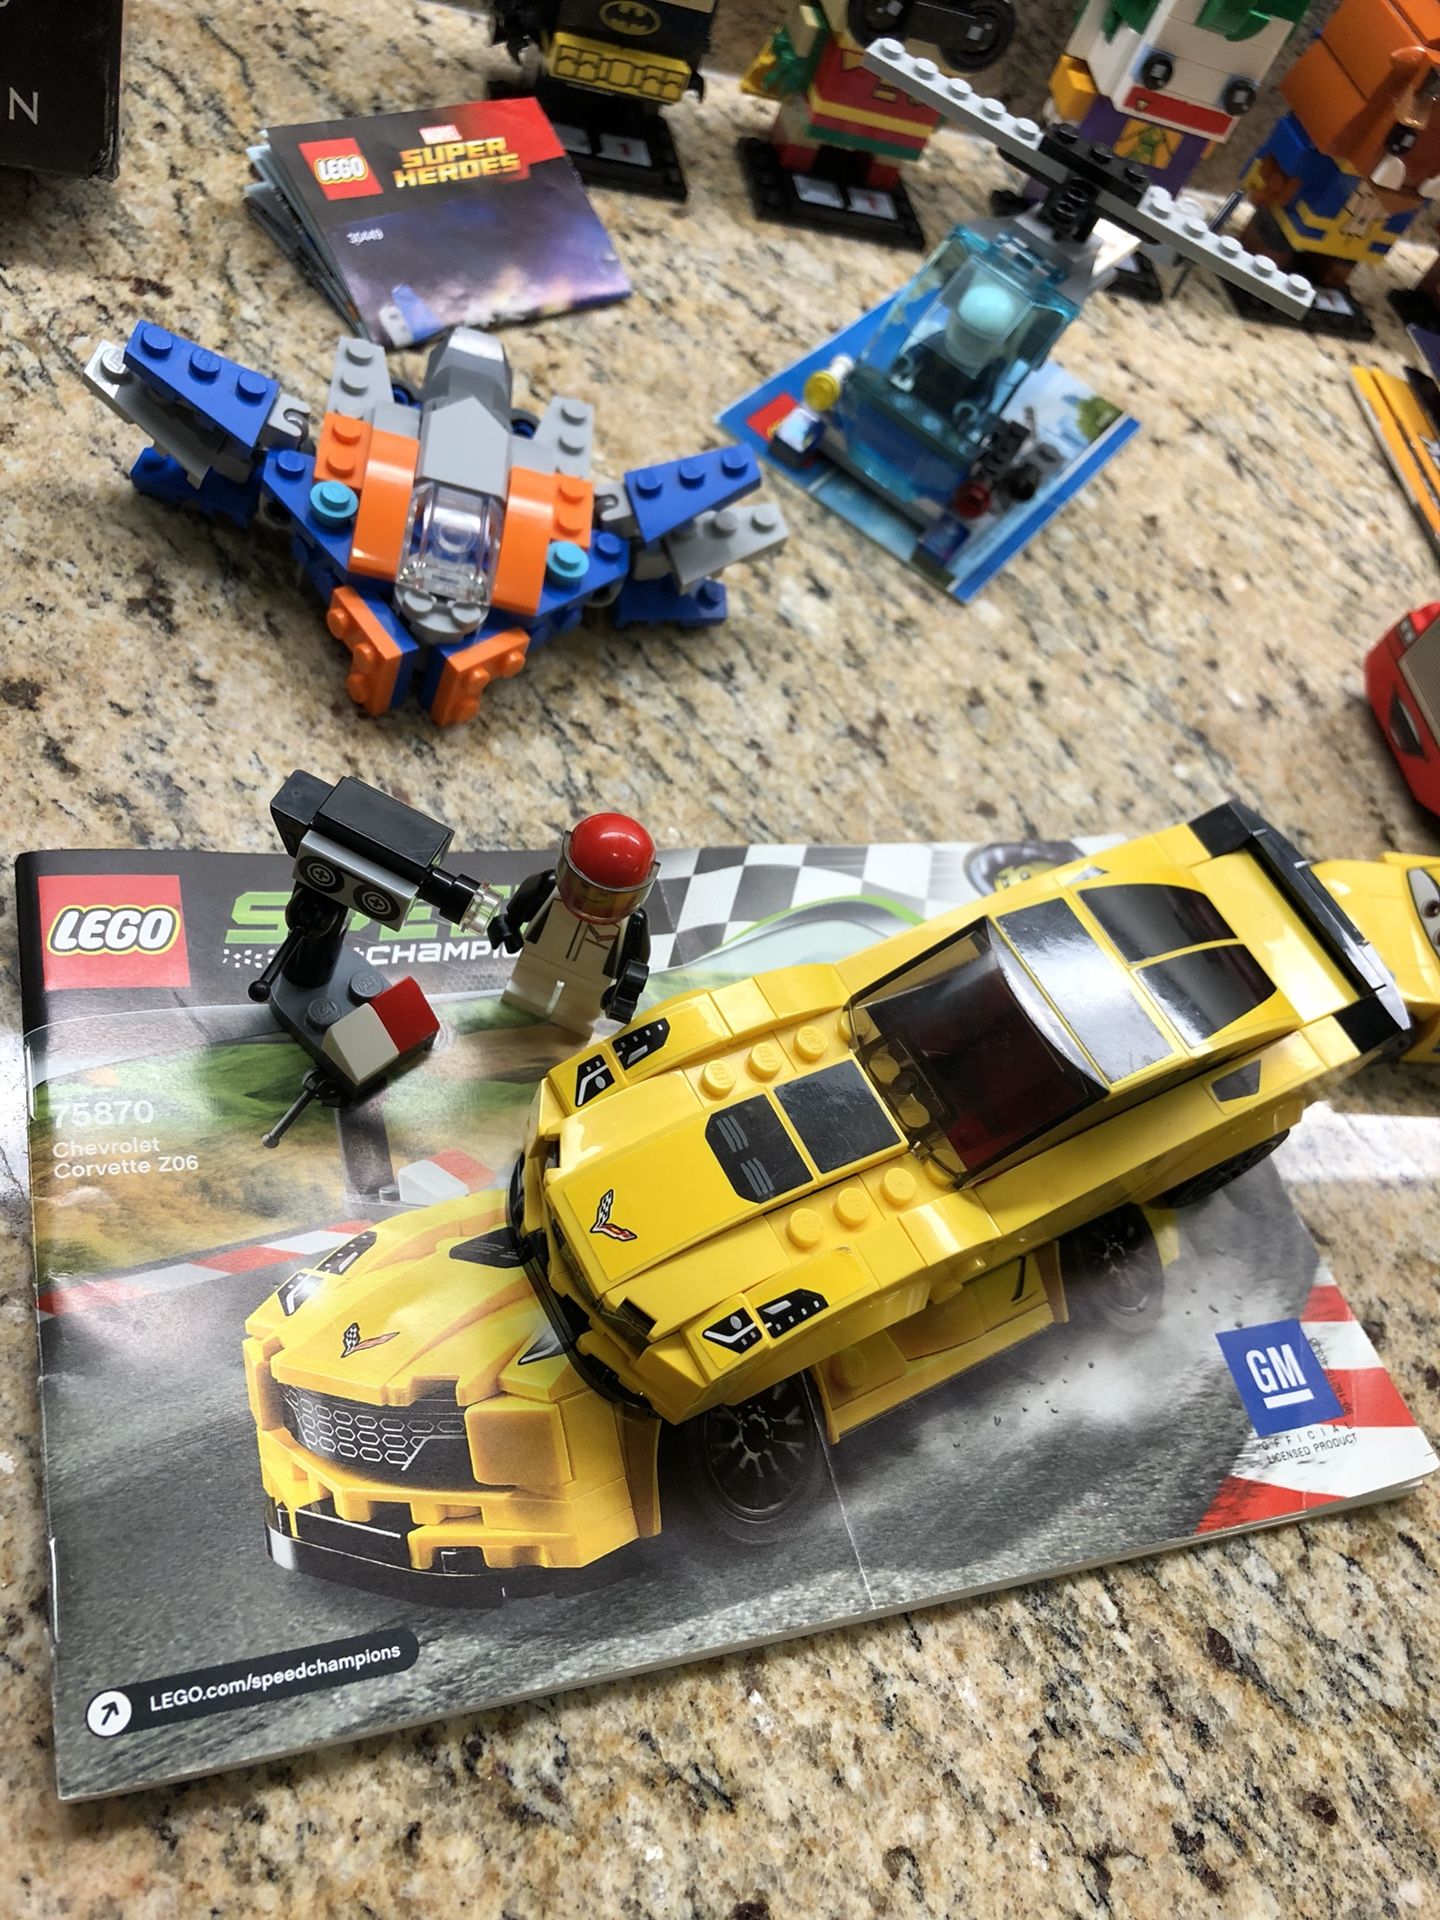 LEGO 75870, 31057, 40252, 40220, 10745, 10743, 10683 for Sale in Irvine, CA -